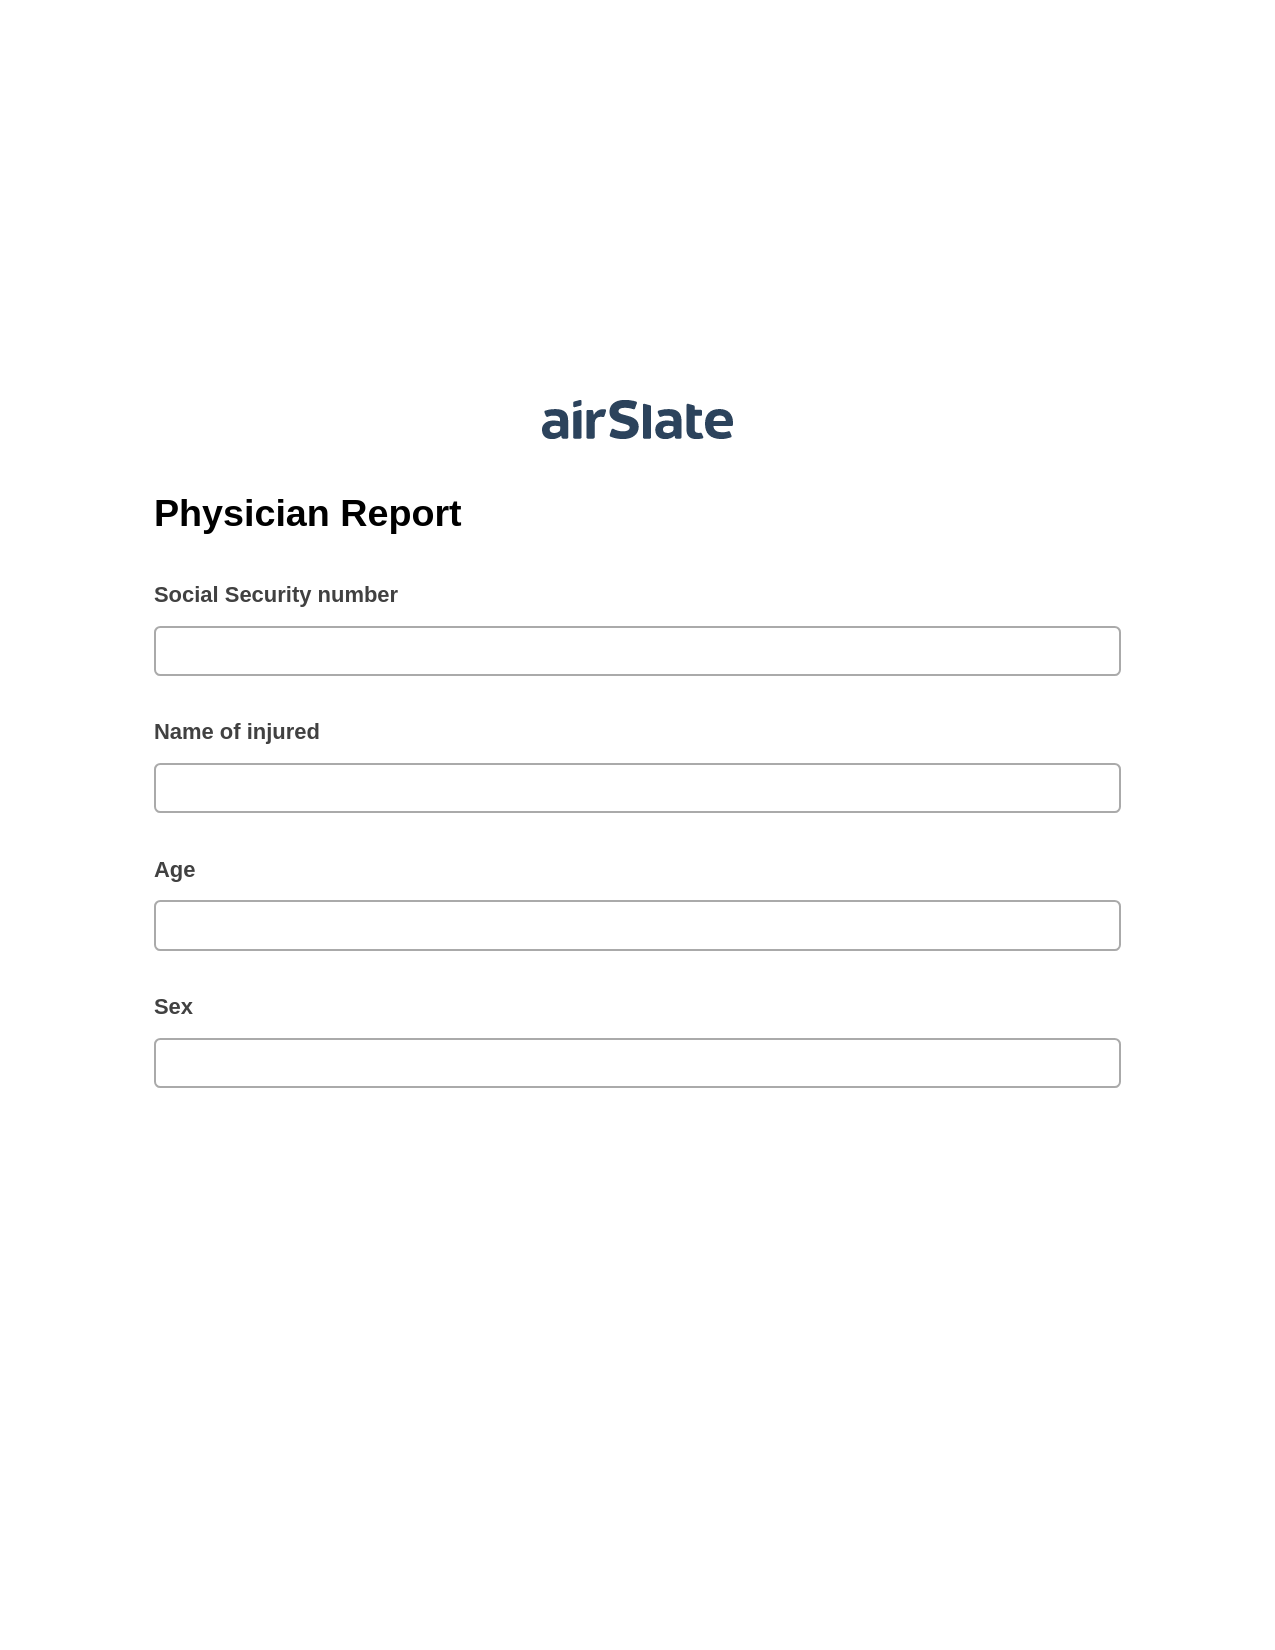 Physician Report Pre-fill from Excel Spreadsheet Bot, Unassign Role Bot, Export to NetSuite Bot